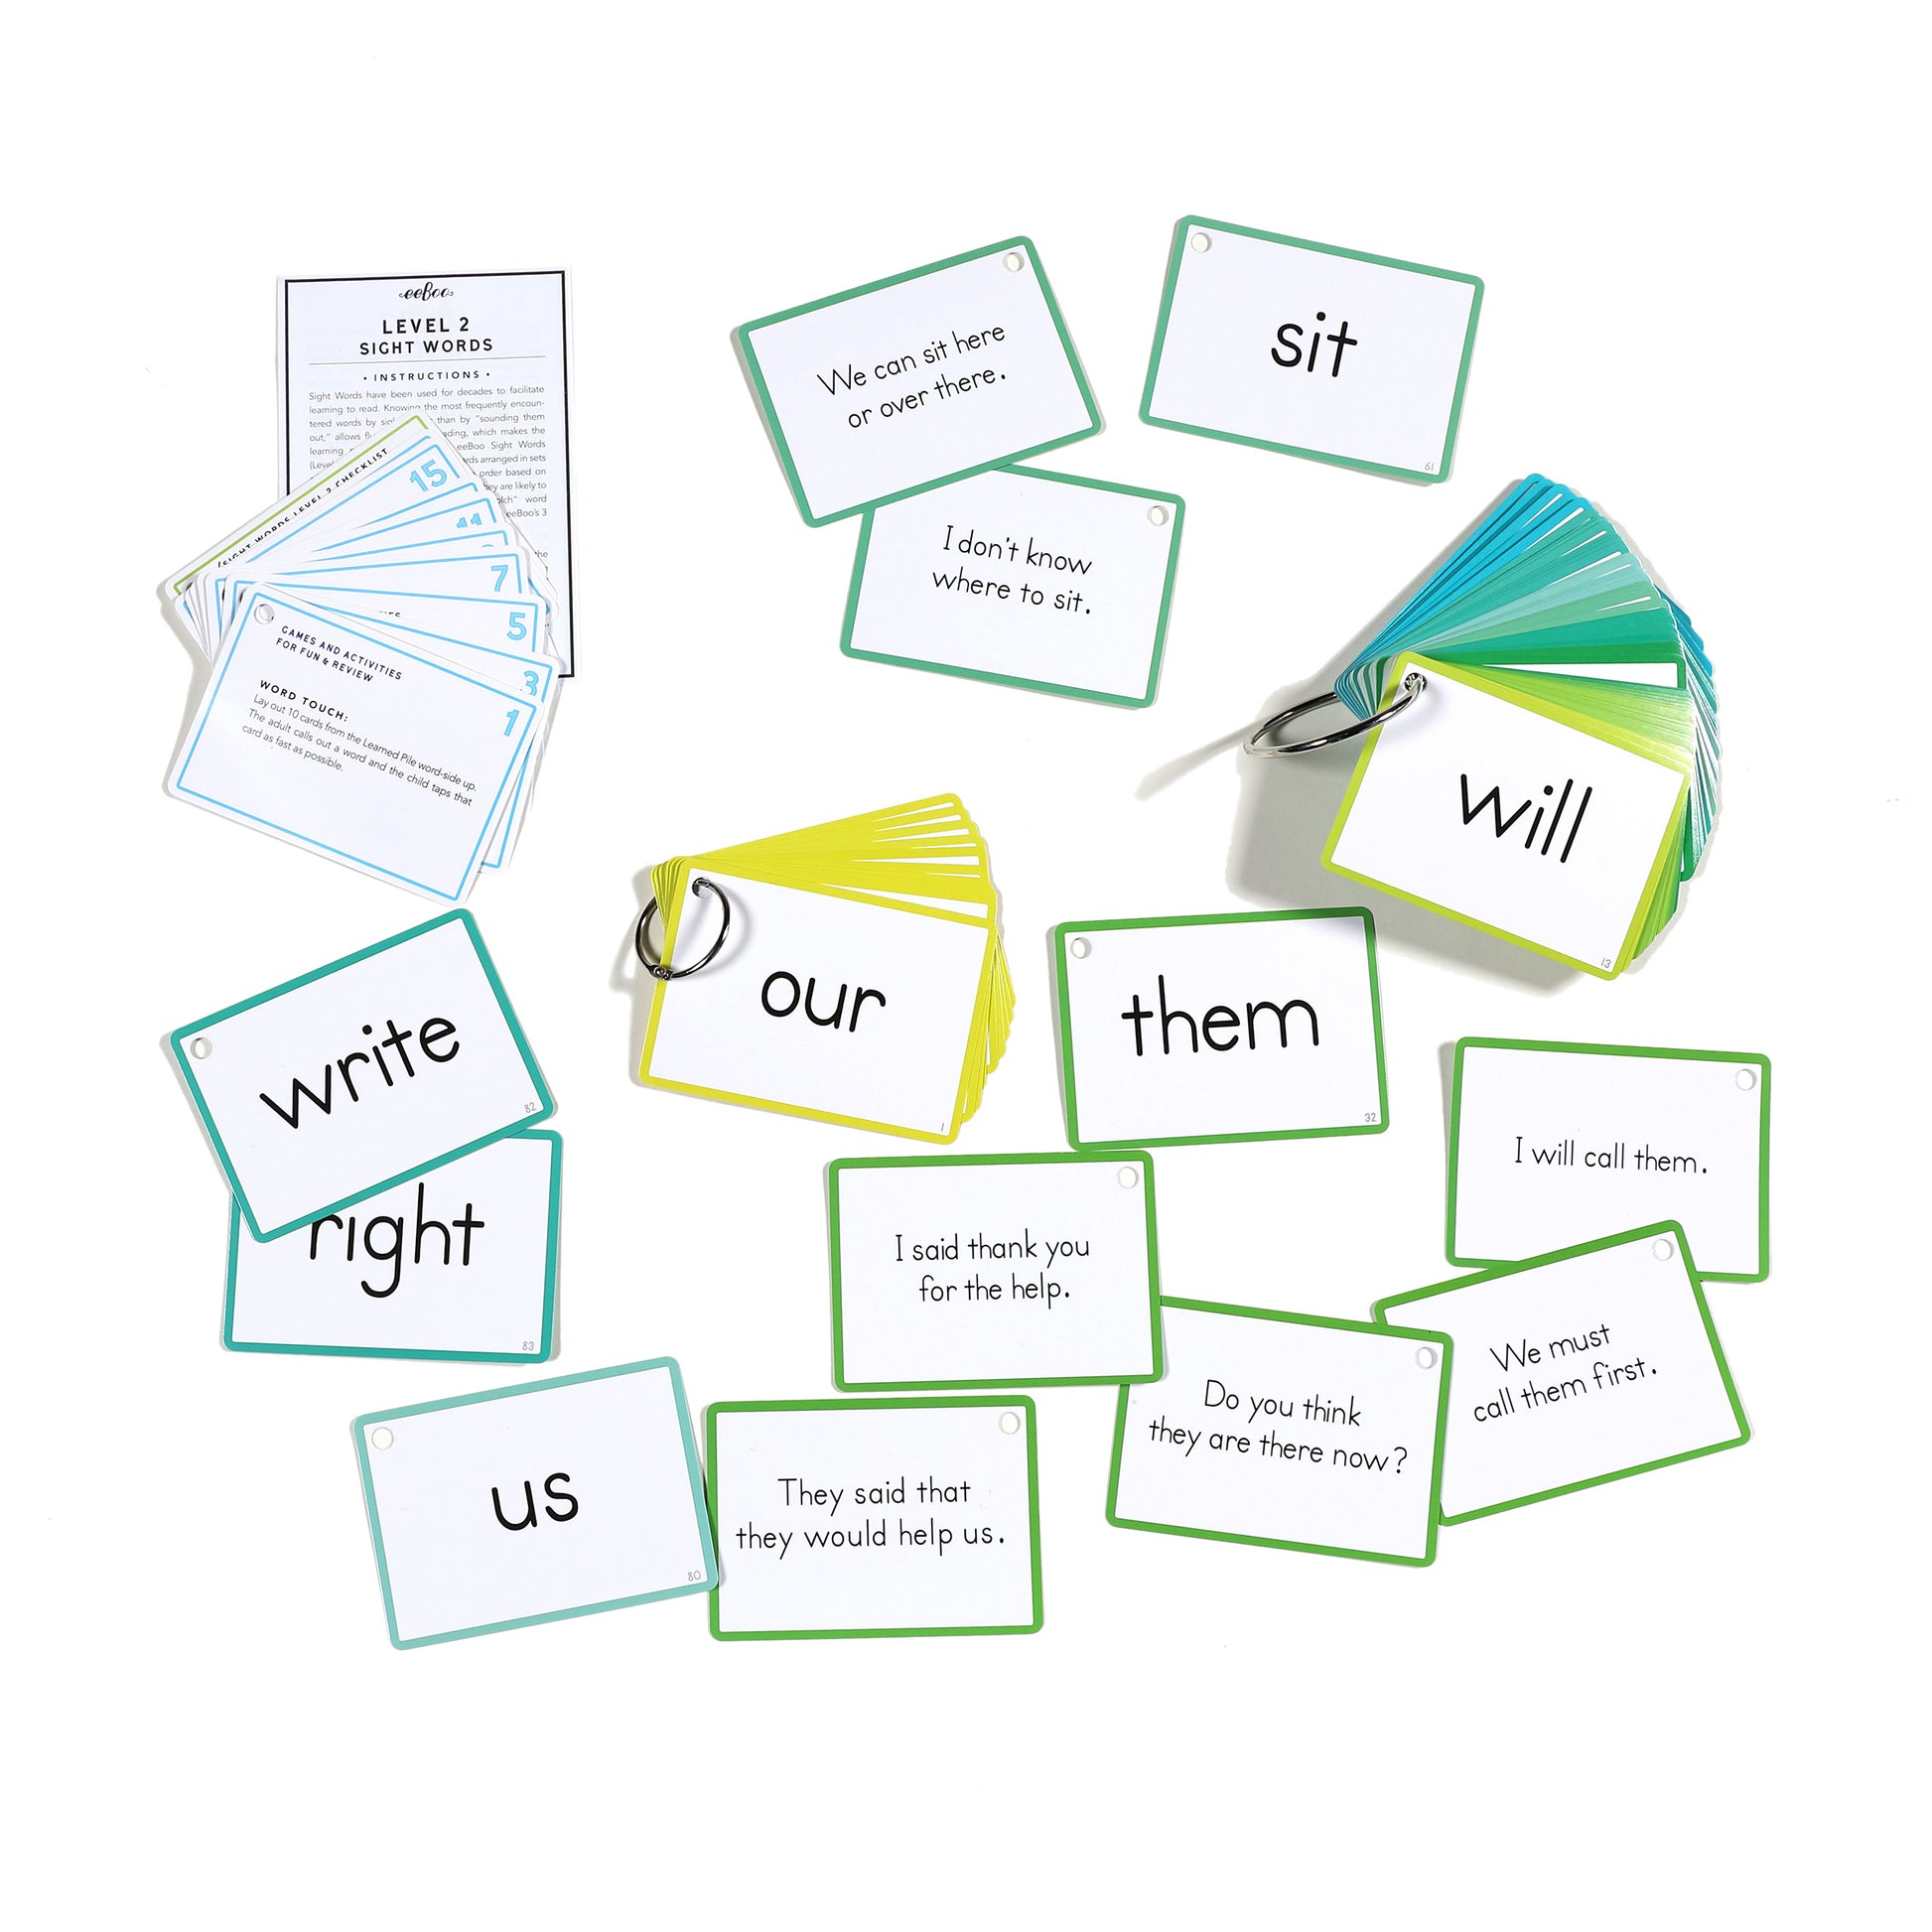 100 Sight Words Level 2 Literacy Dolch List Flash Cards for Kids eeBoo